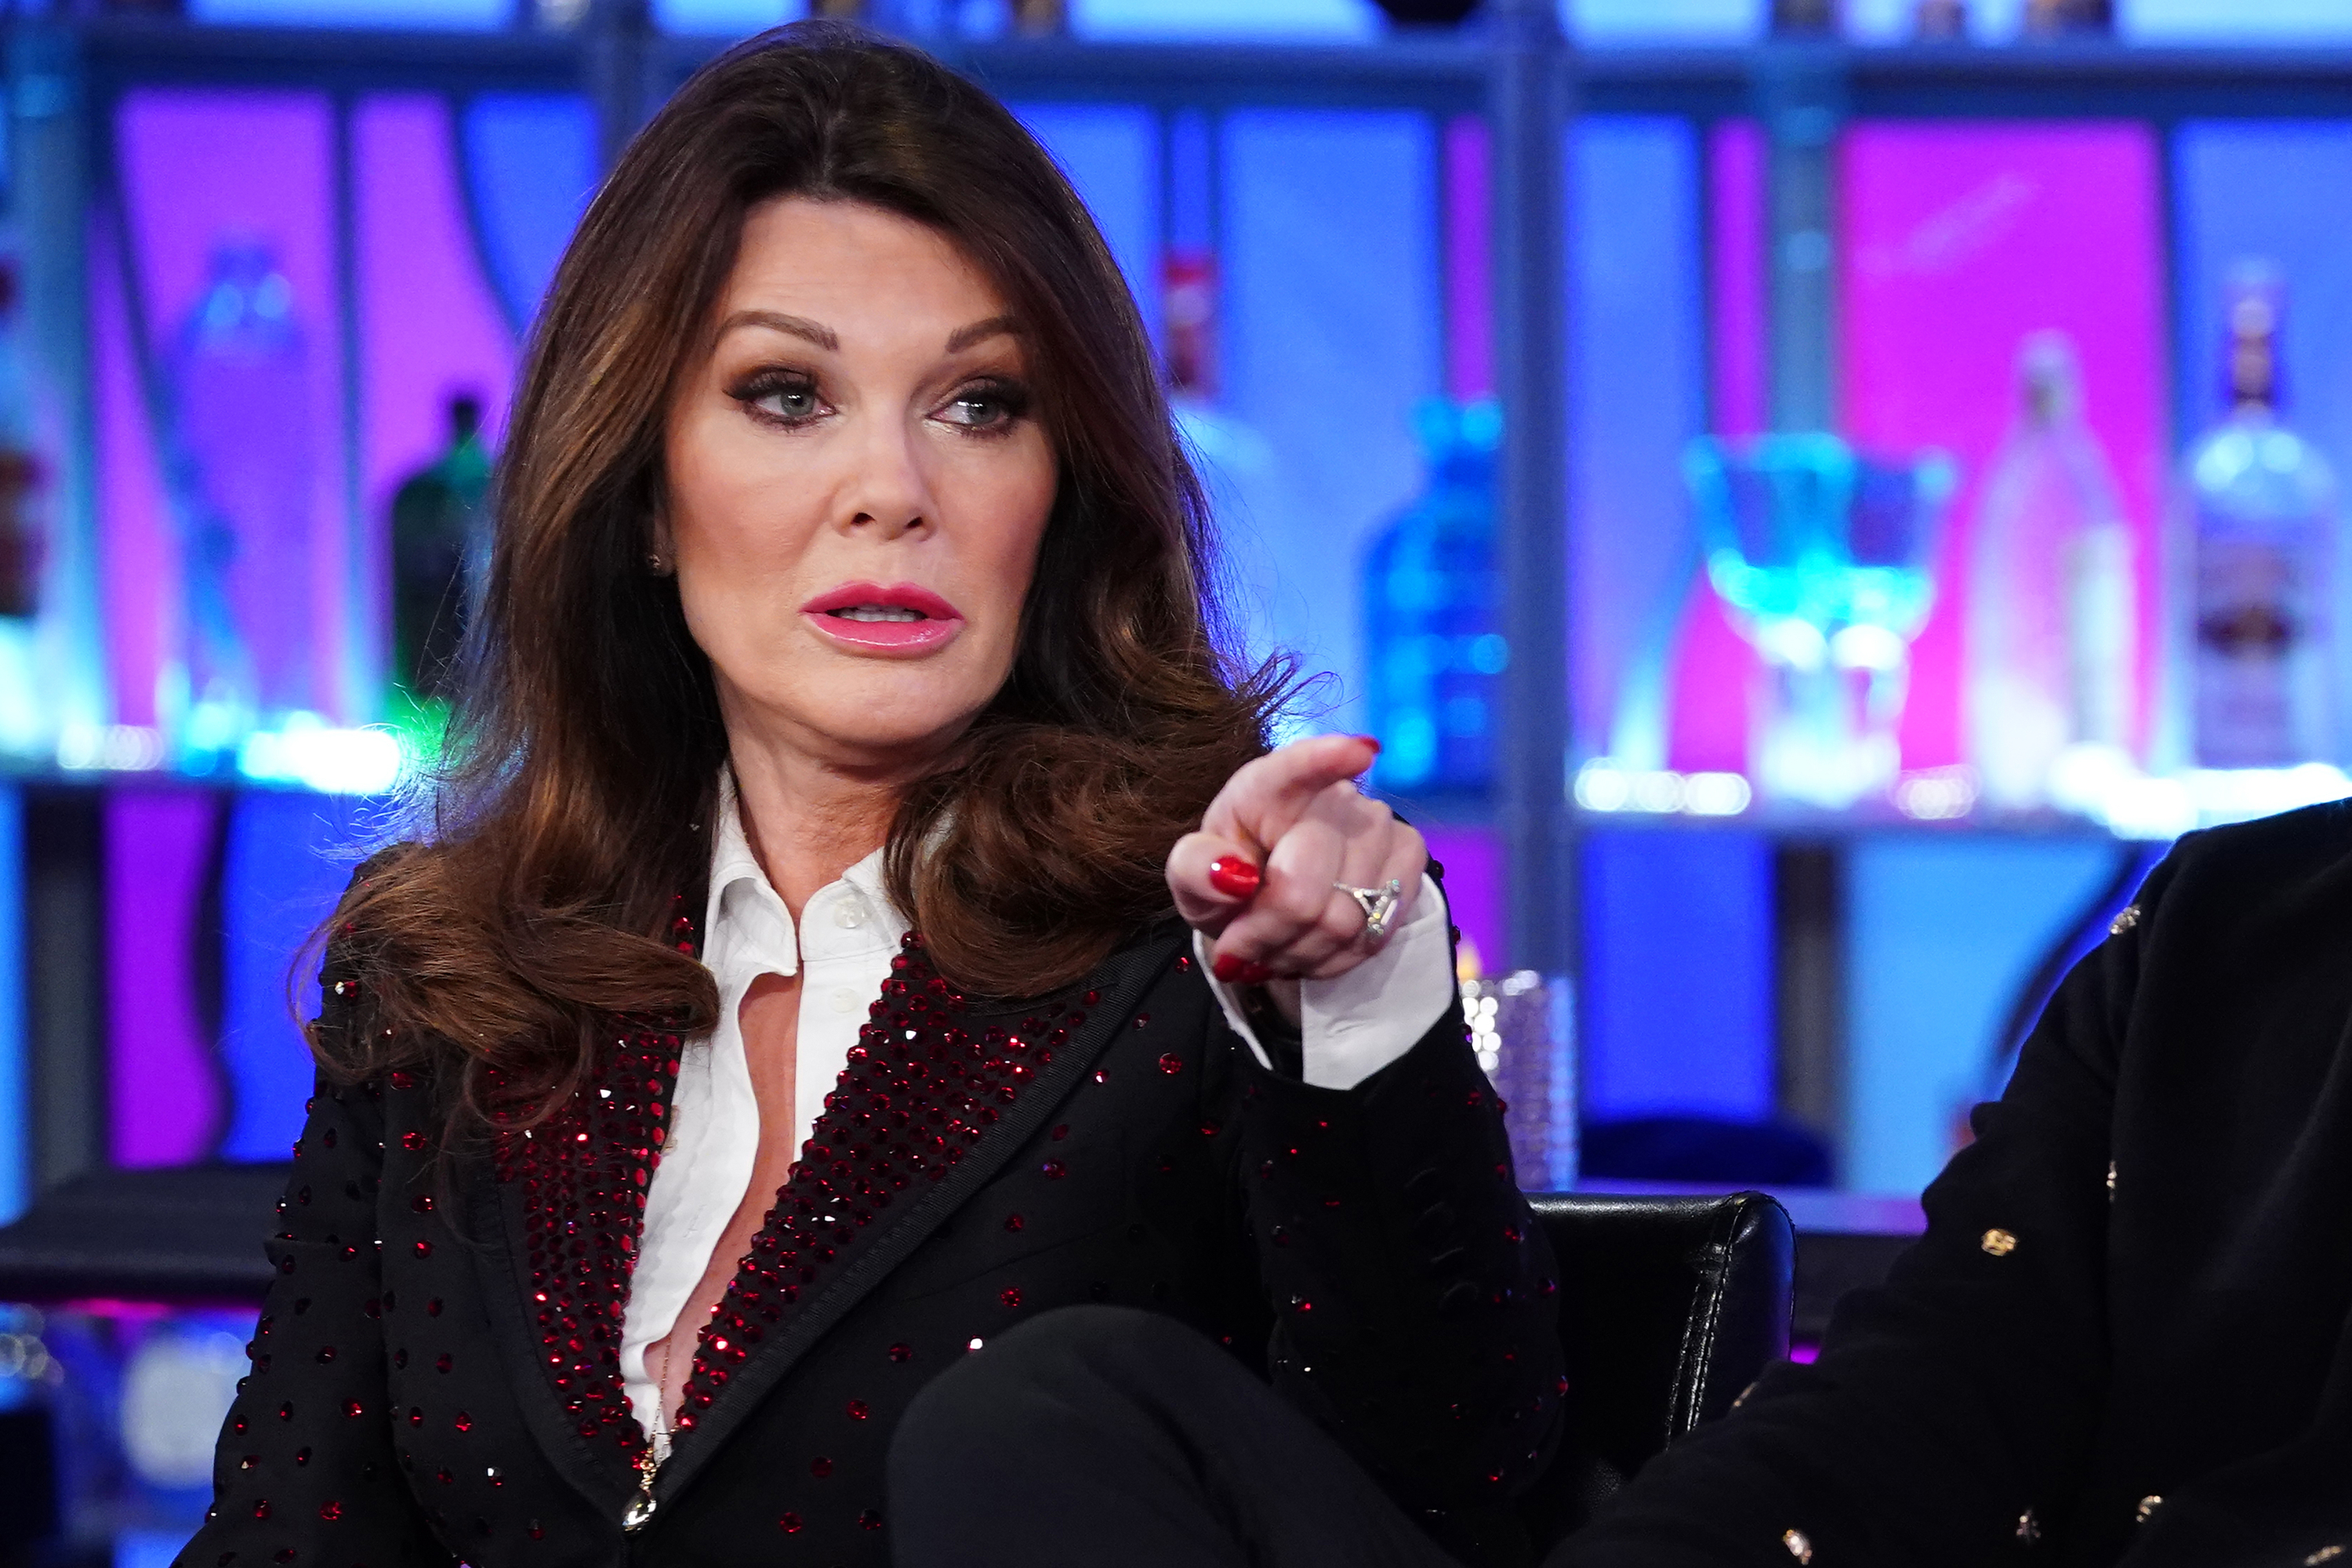 A Slightly Unhinged Investigation Into the Lisa Vanderpump Conspiracy Theories